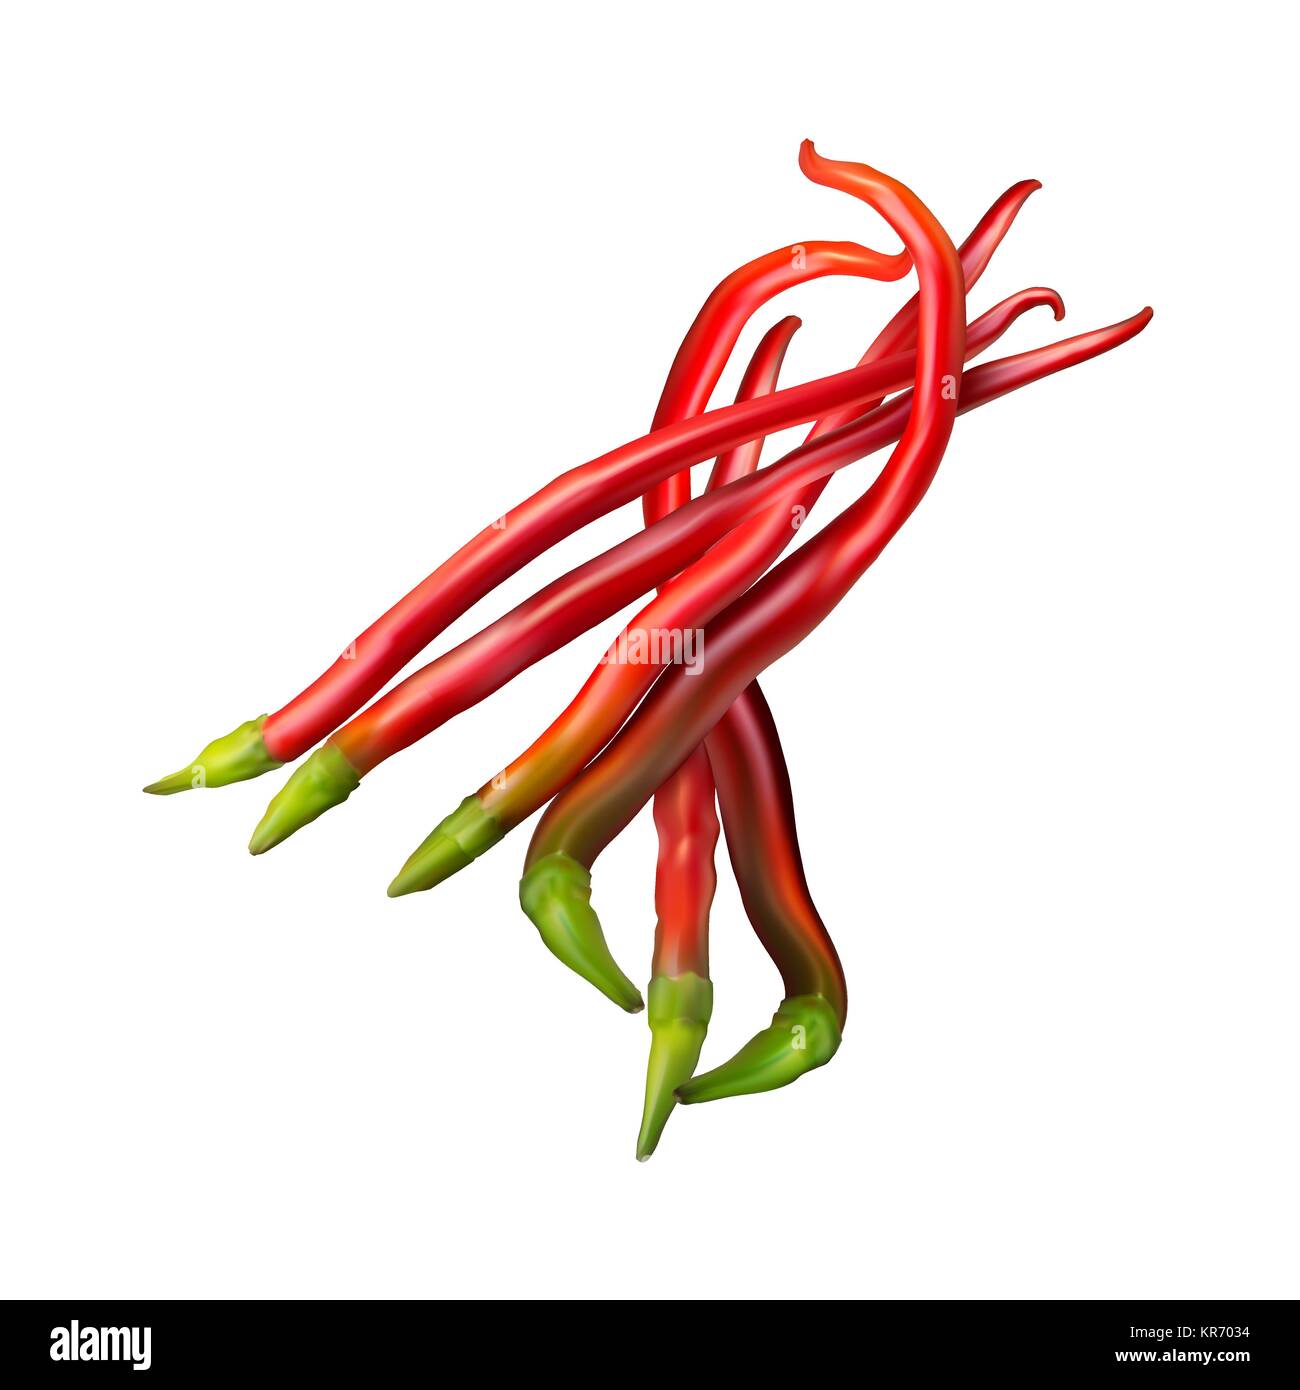 Realistic image of Mexican red hot chili pepper on white background Stock Vector